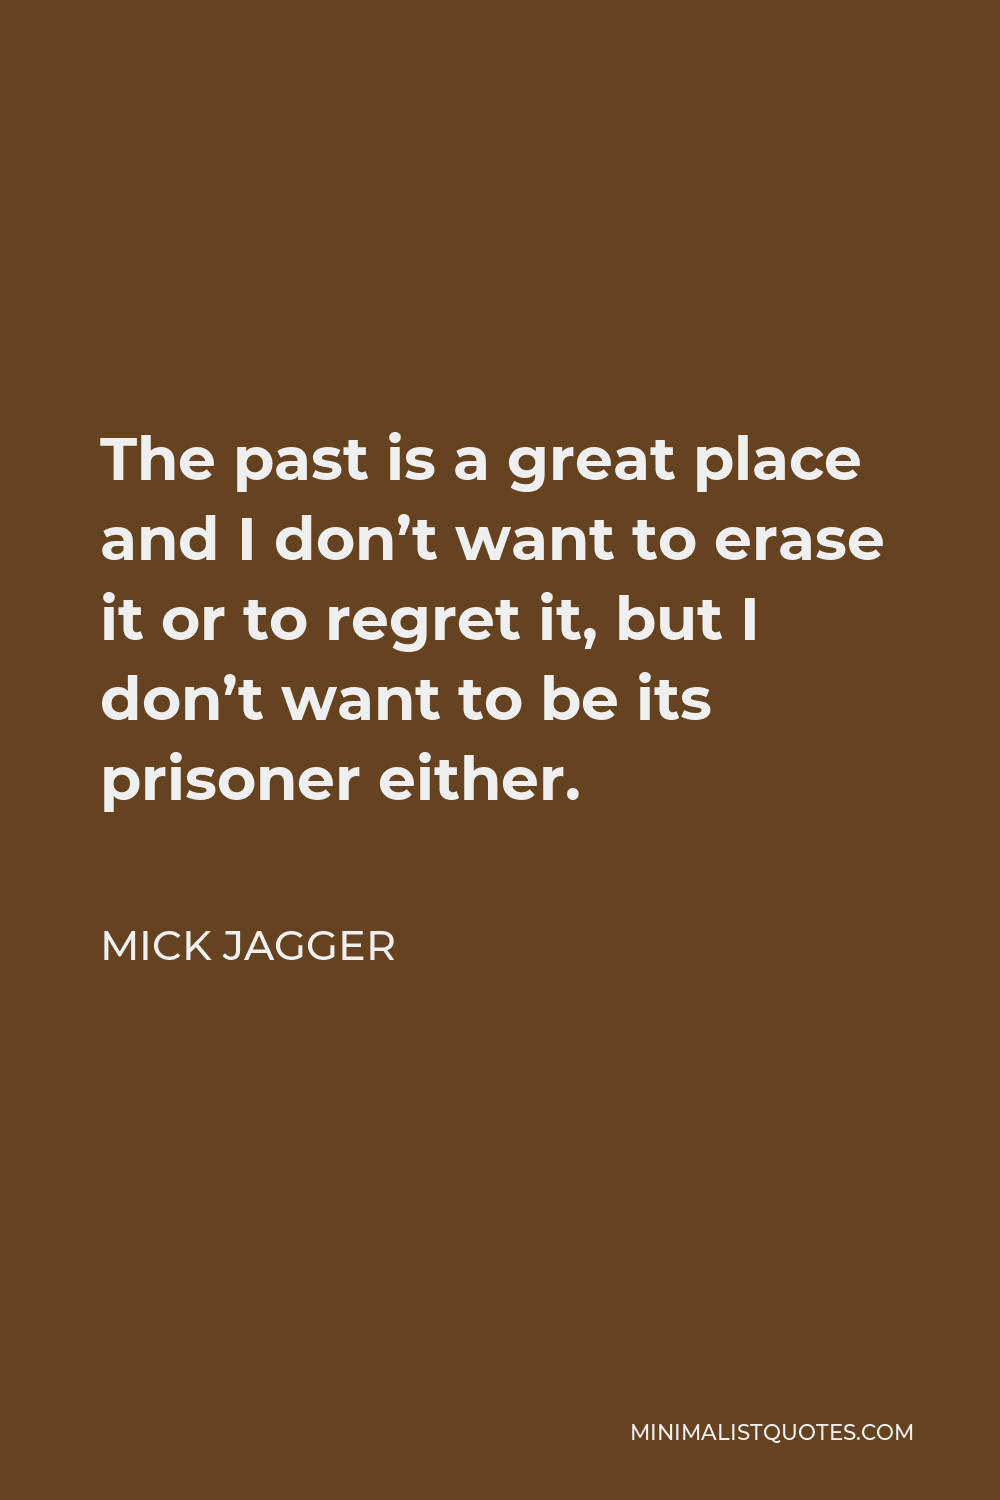 Mick Jagger Quote - The past is a great place and I don’t want to erase it or to regret it, but I don’t want to be its prisoner either.